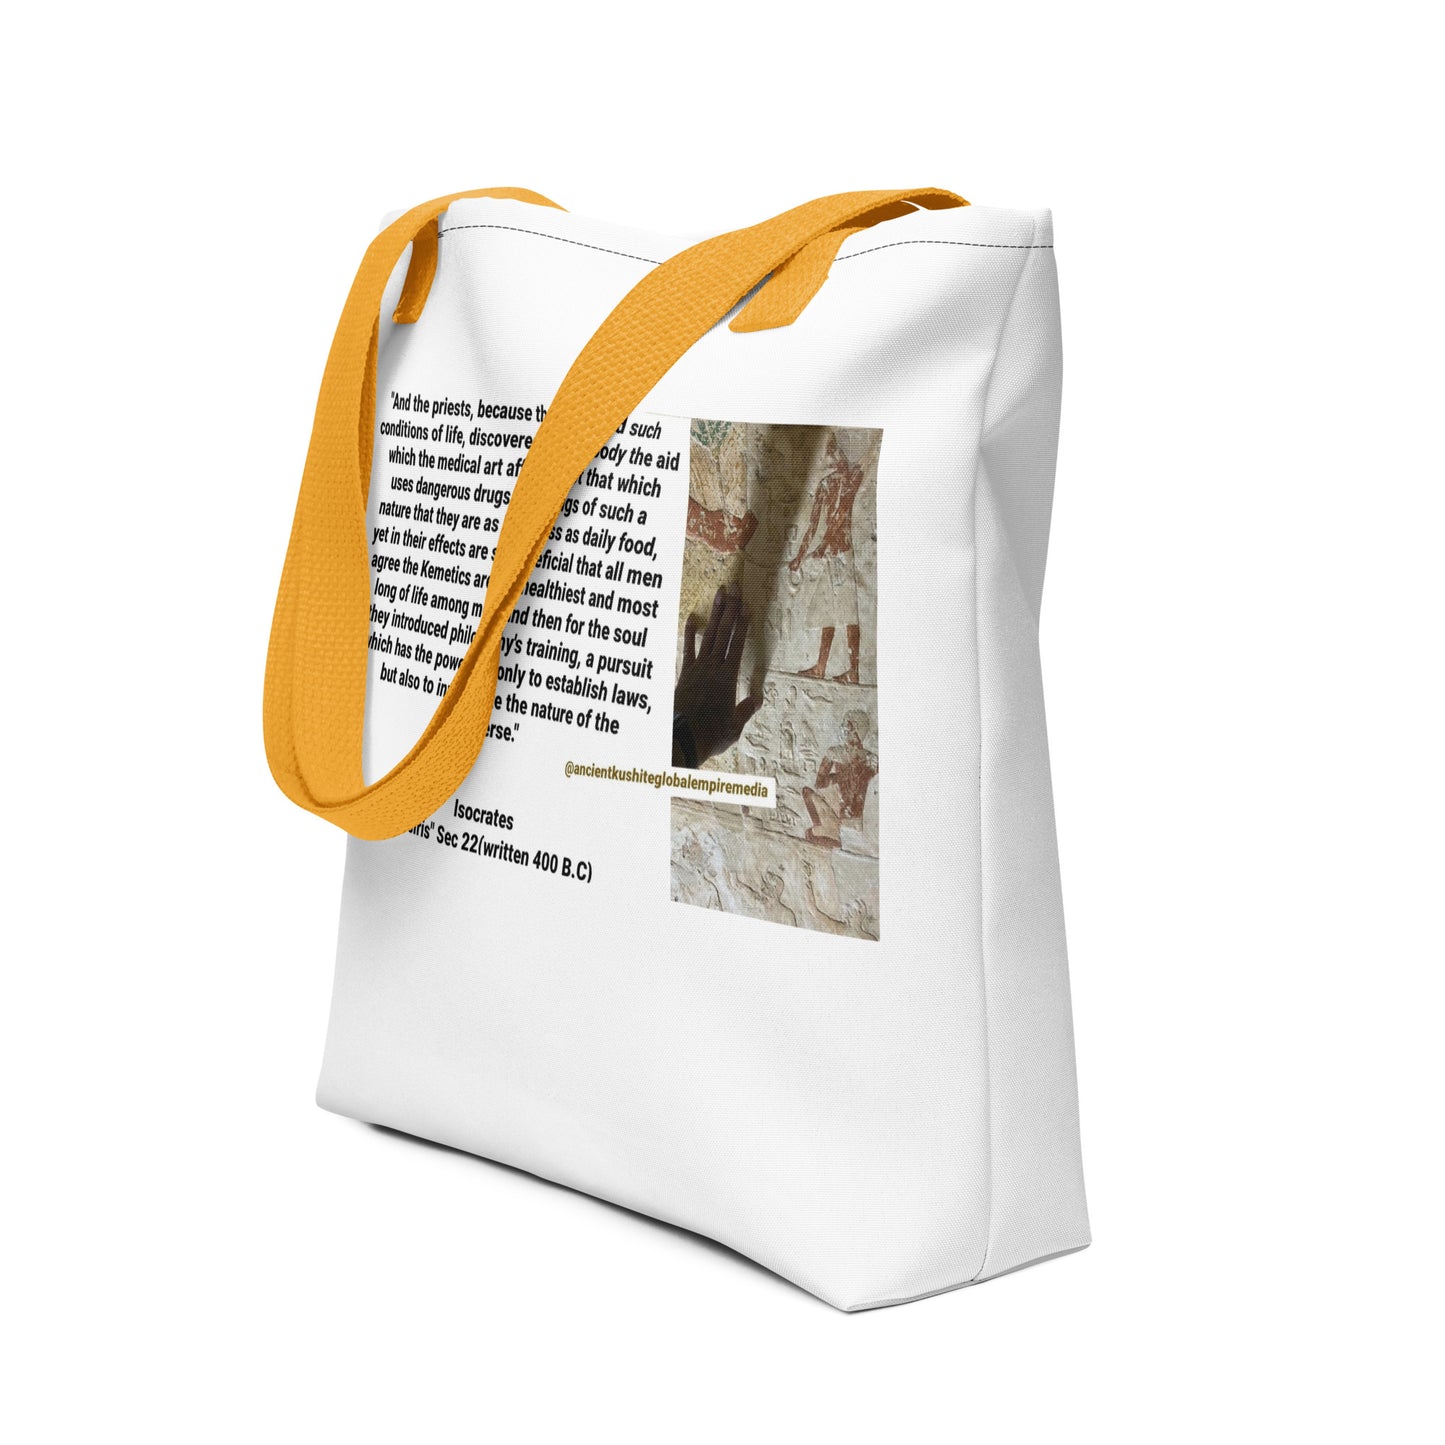 Kemetics are the Healthiest & most Long Among Men Tote bag